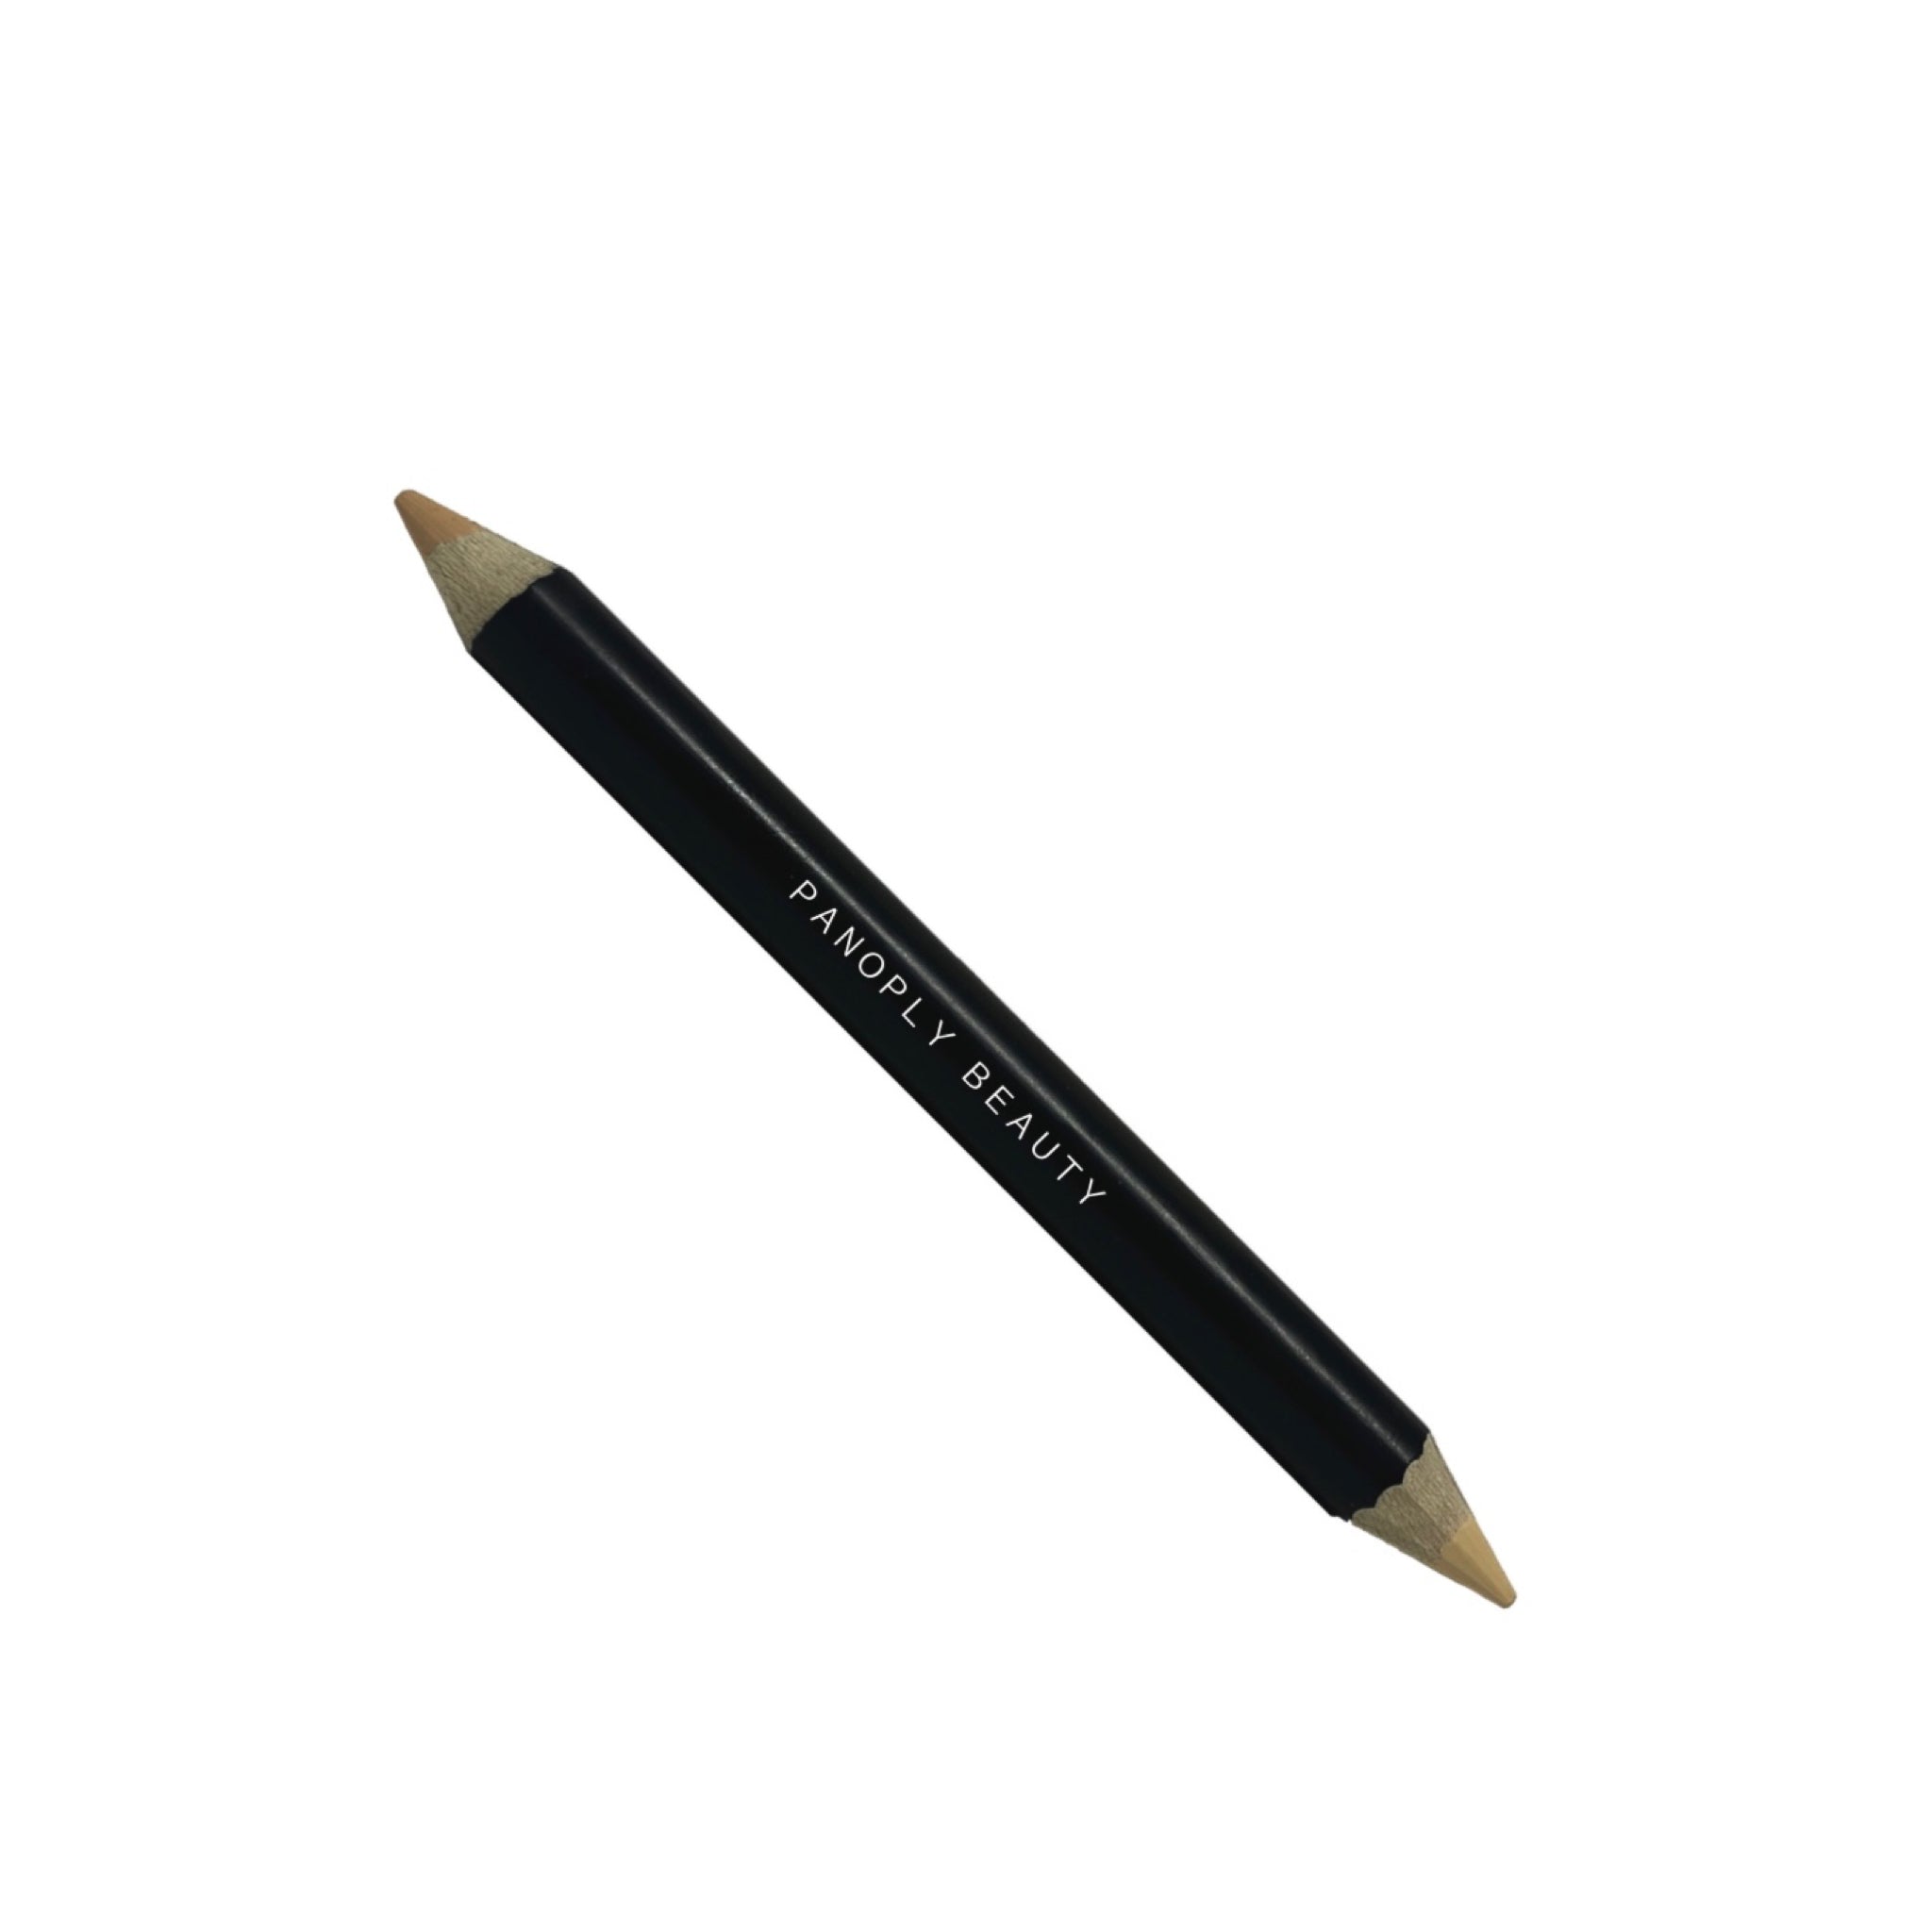 Highlighter/Concealer Pencil - Panoply Beauty 